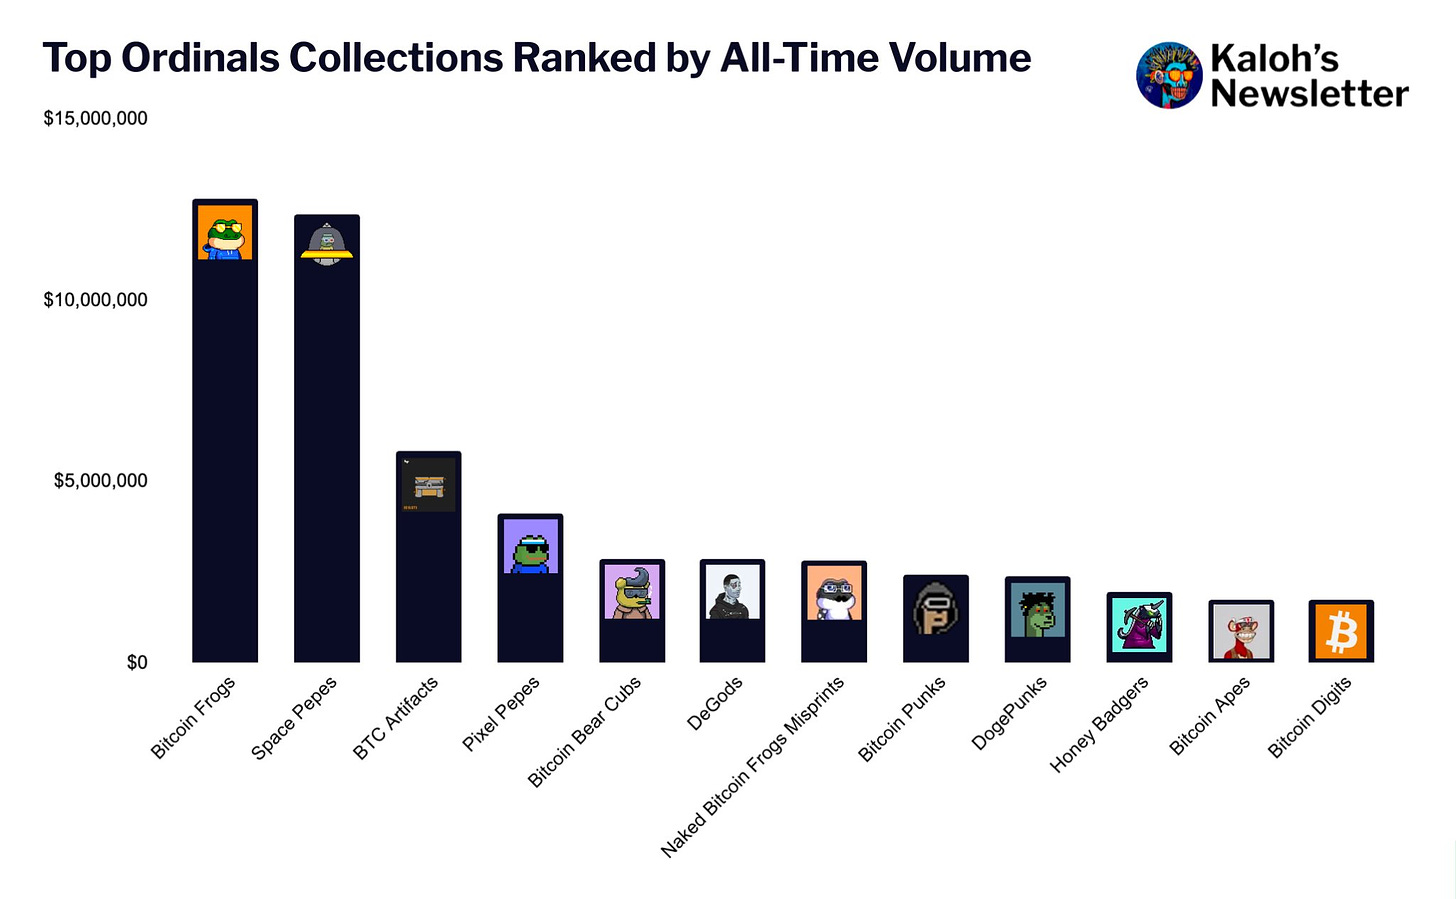 Top Ordinals Collections Ranked by All-Time Volume.